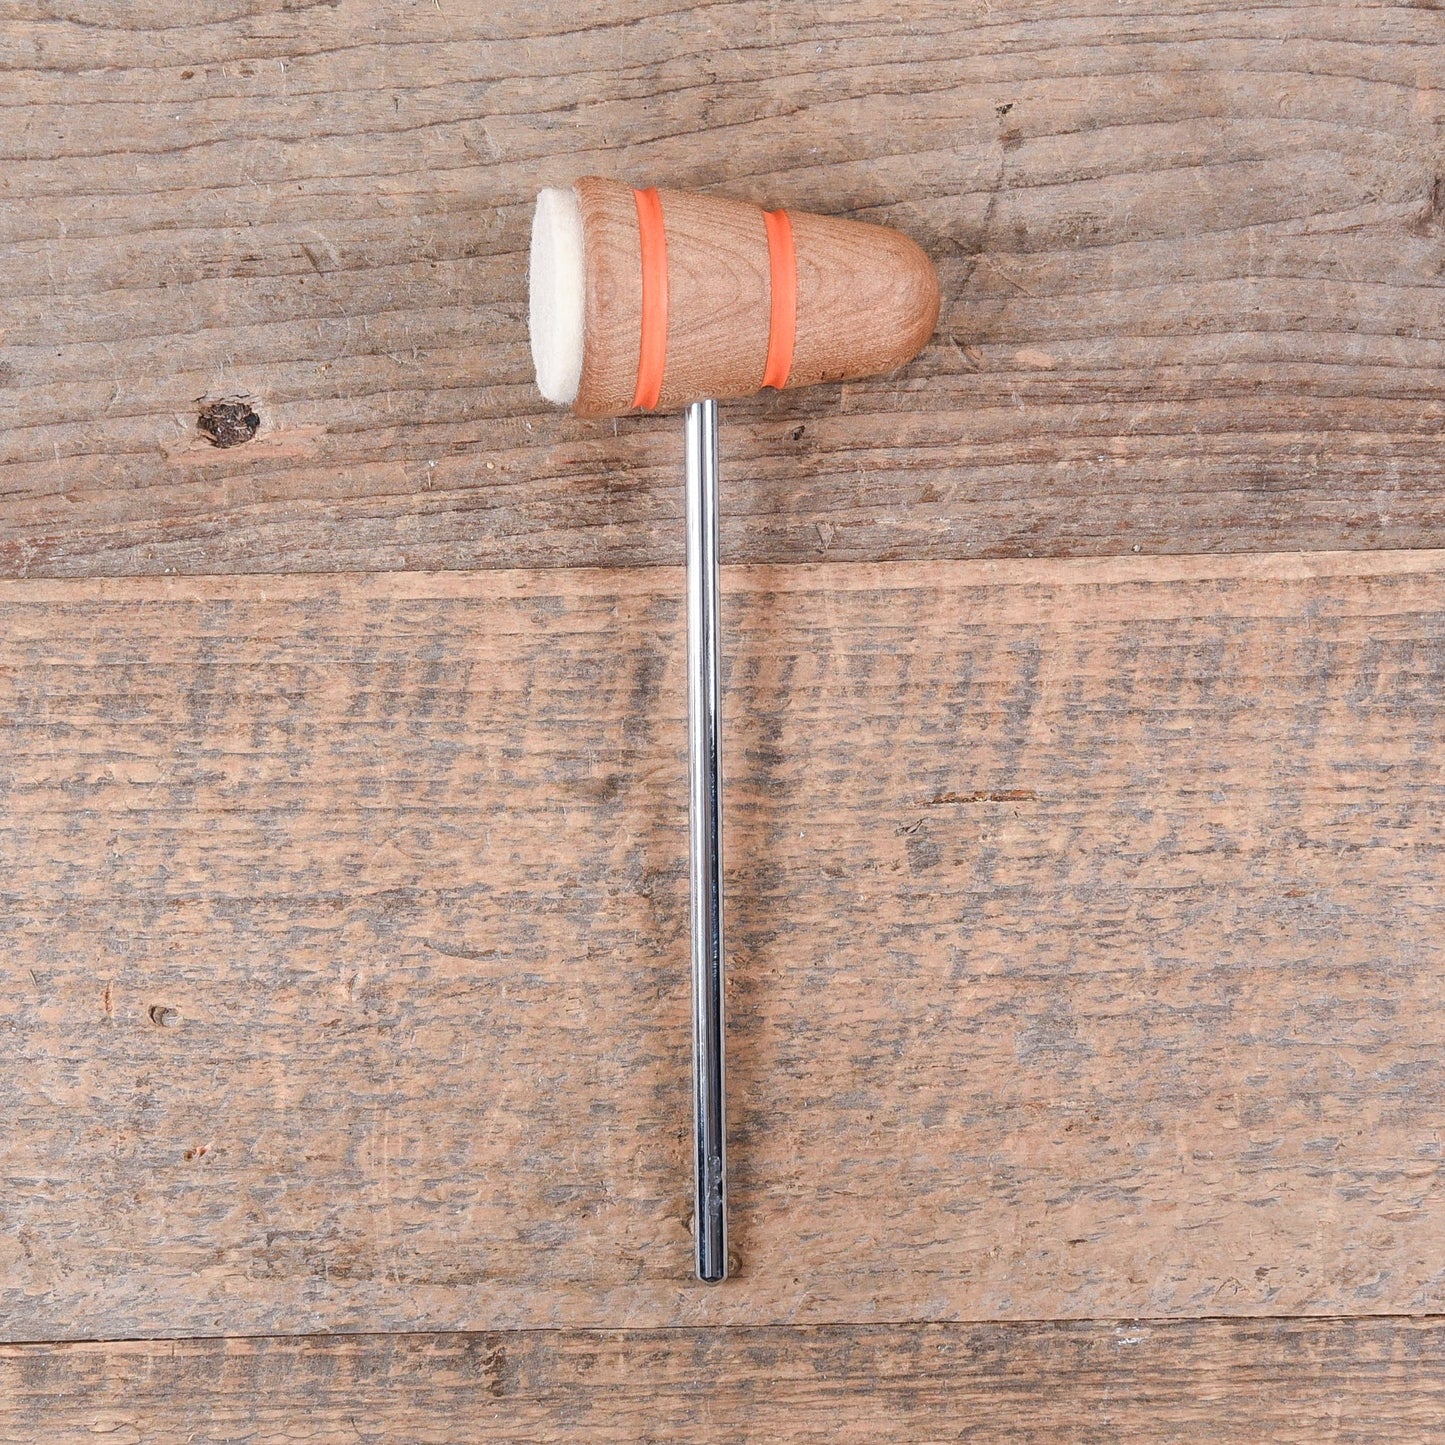 Low Boy Standard Felt Bass Drum Beater Natural w/Orange Stripes Drums and Percussion / Parts and Accessories / Drum Parts